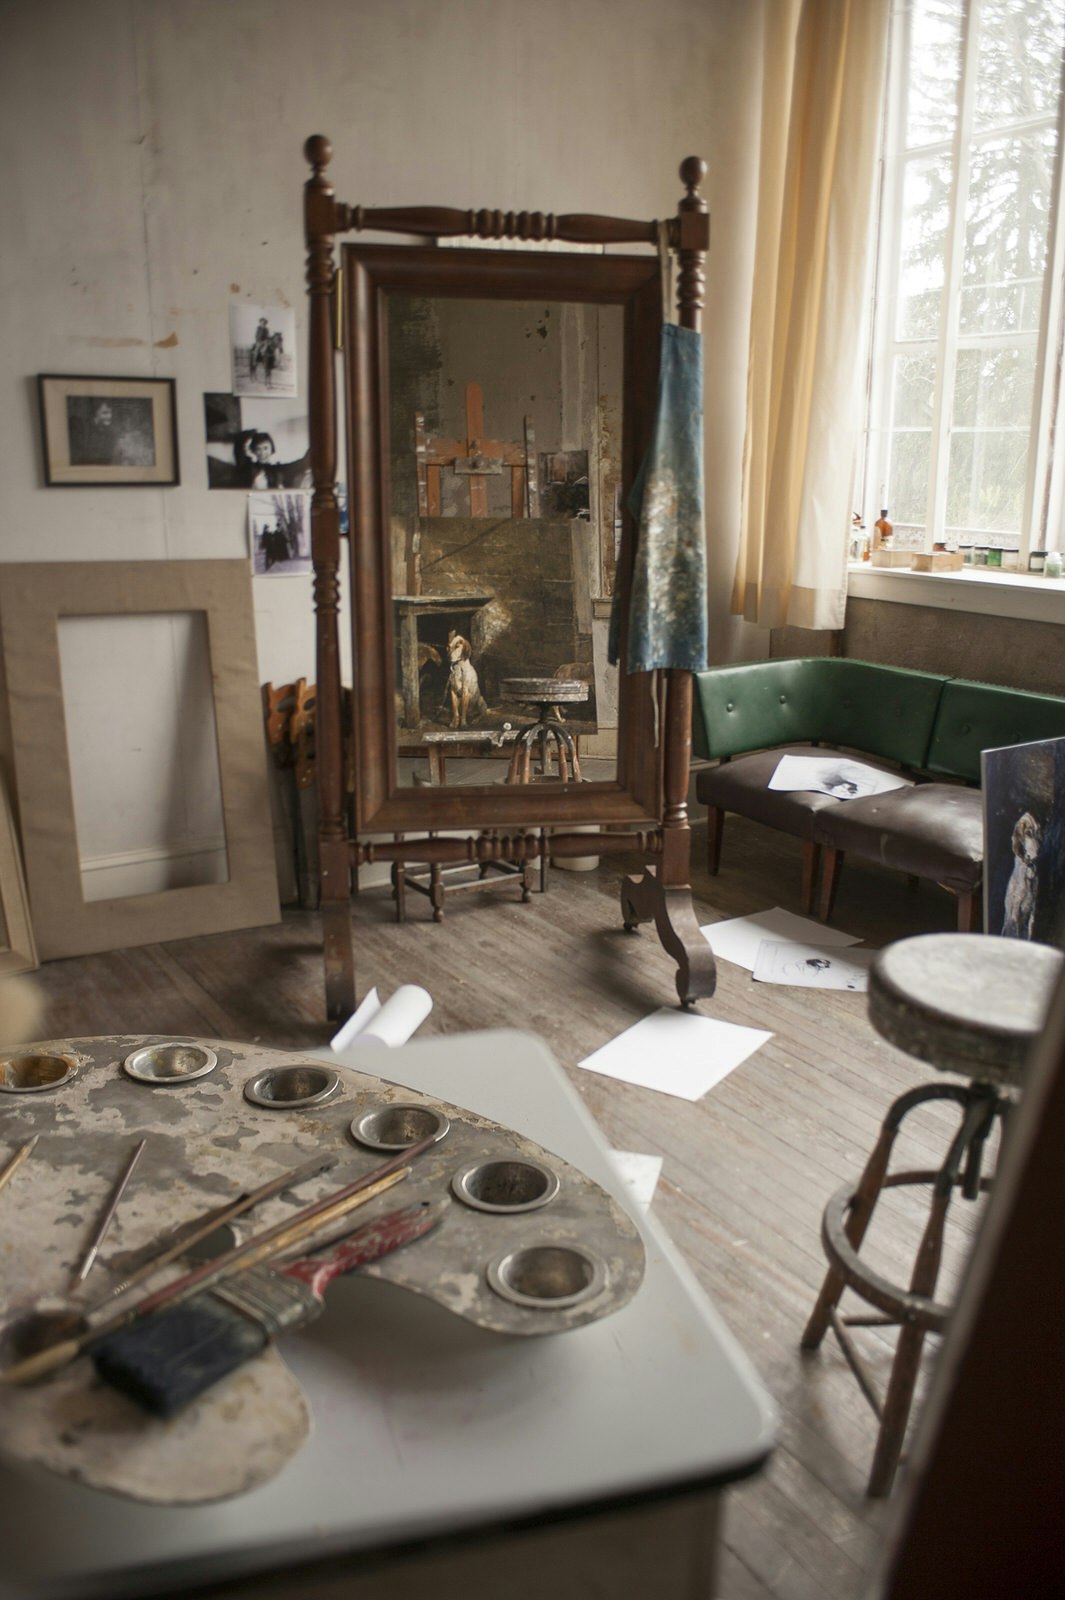 An antique, wood-framed, freestanding mirror in the centre of a room, where pieces of sketch paper are littered across the floor, photographs adorn the walls and a set of oil paints are visible in the foreground, at the studio of painted Andrew Wyeth in Pennsylvania